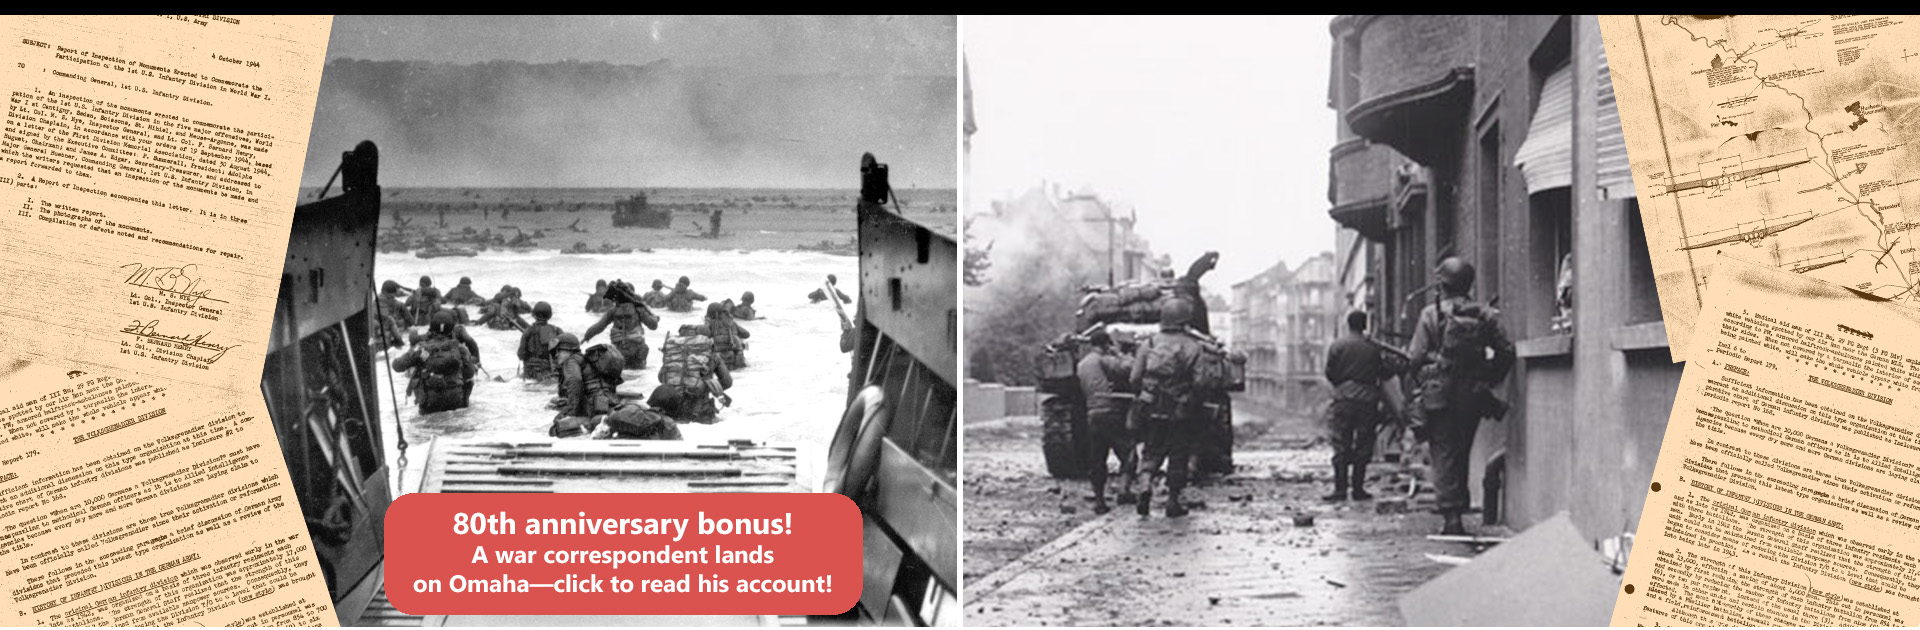 Left: American soldiers wade ashore onto Omaha Beach on D-Day. Right: American soldiers, accompanied by Sherman tanks, clear a street in Aachen, the first German city to fall to the Allies.